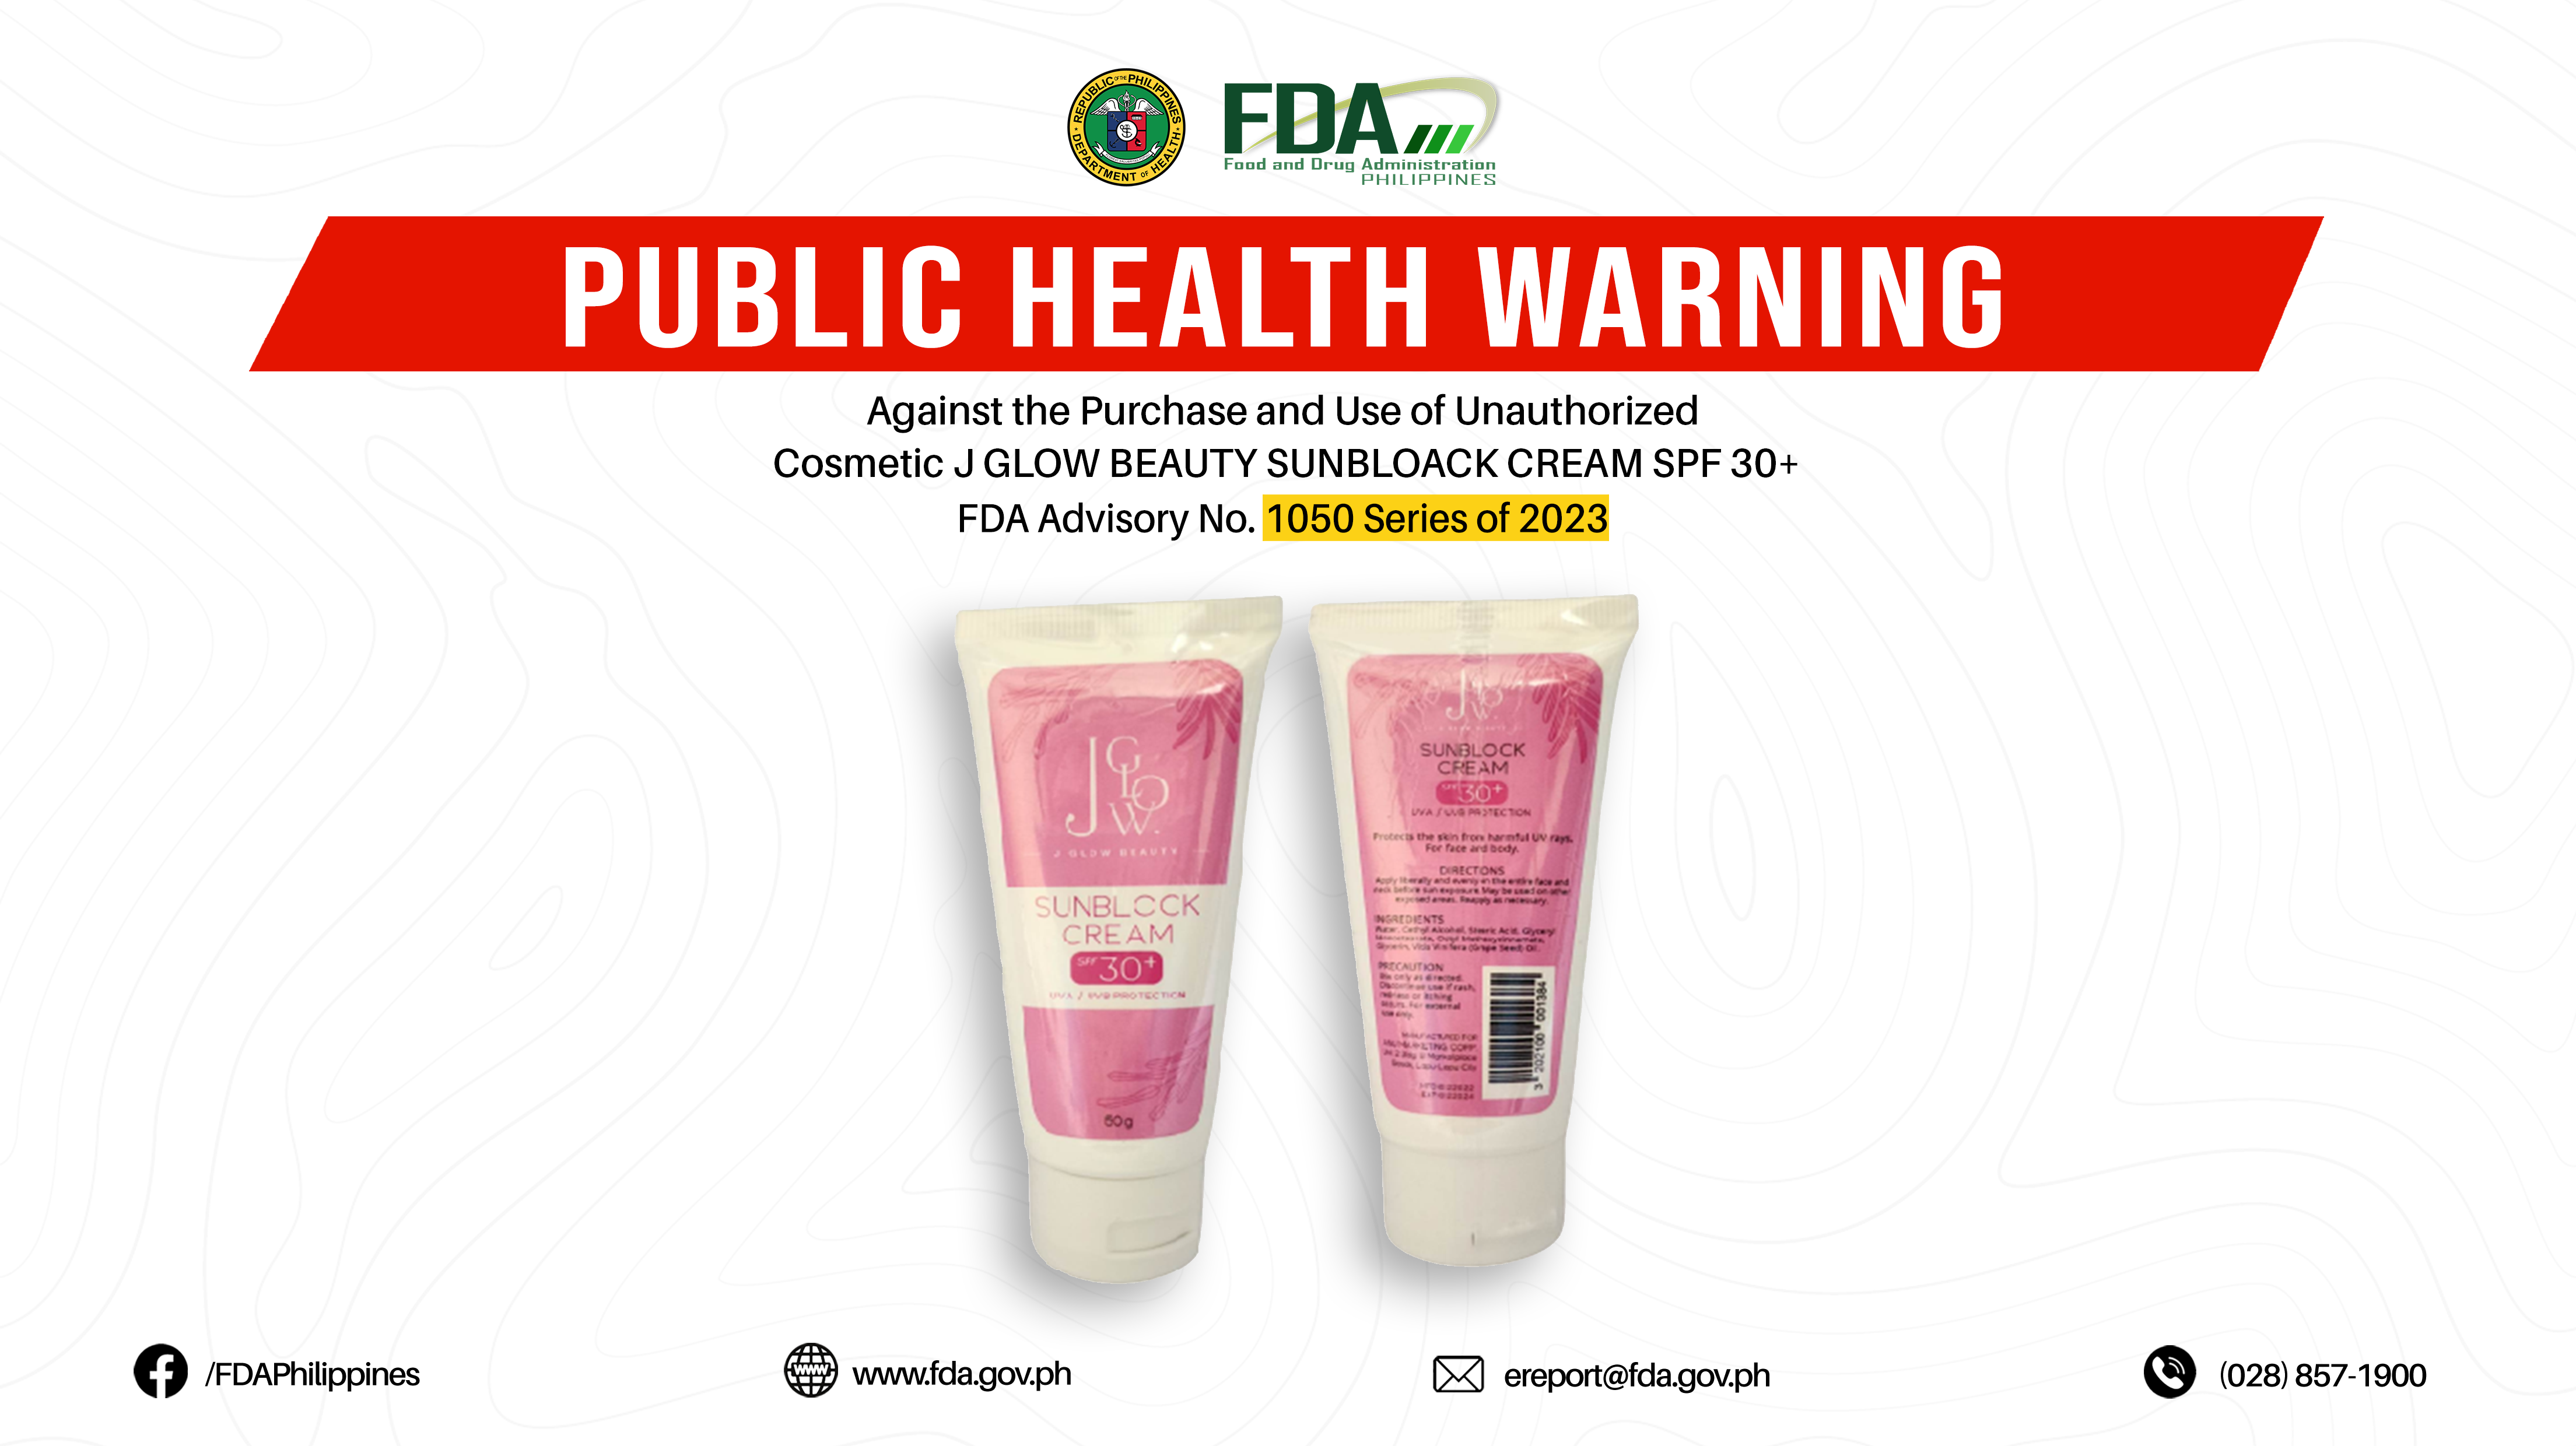 FDA Advisory No.2023-1050 || Public Health Warning Against the Purchase and Use of Unauthorized Cosmetic J GLOW BEAUTY SUNBLOACK CREAM SPF 30+